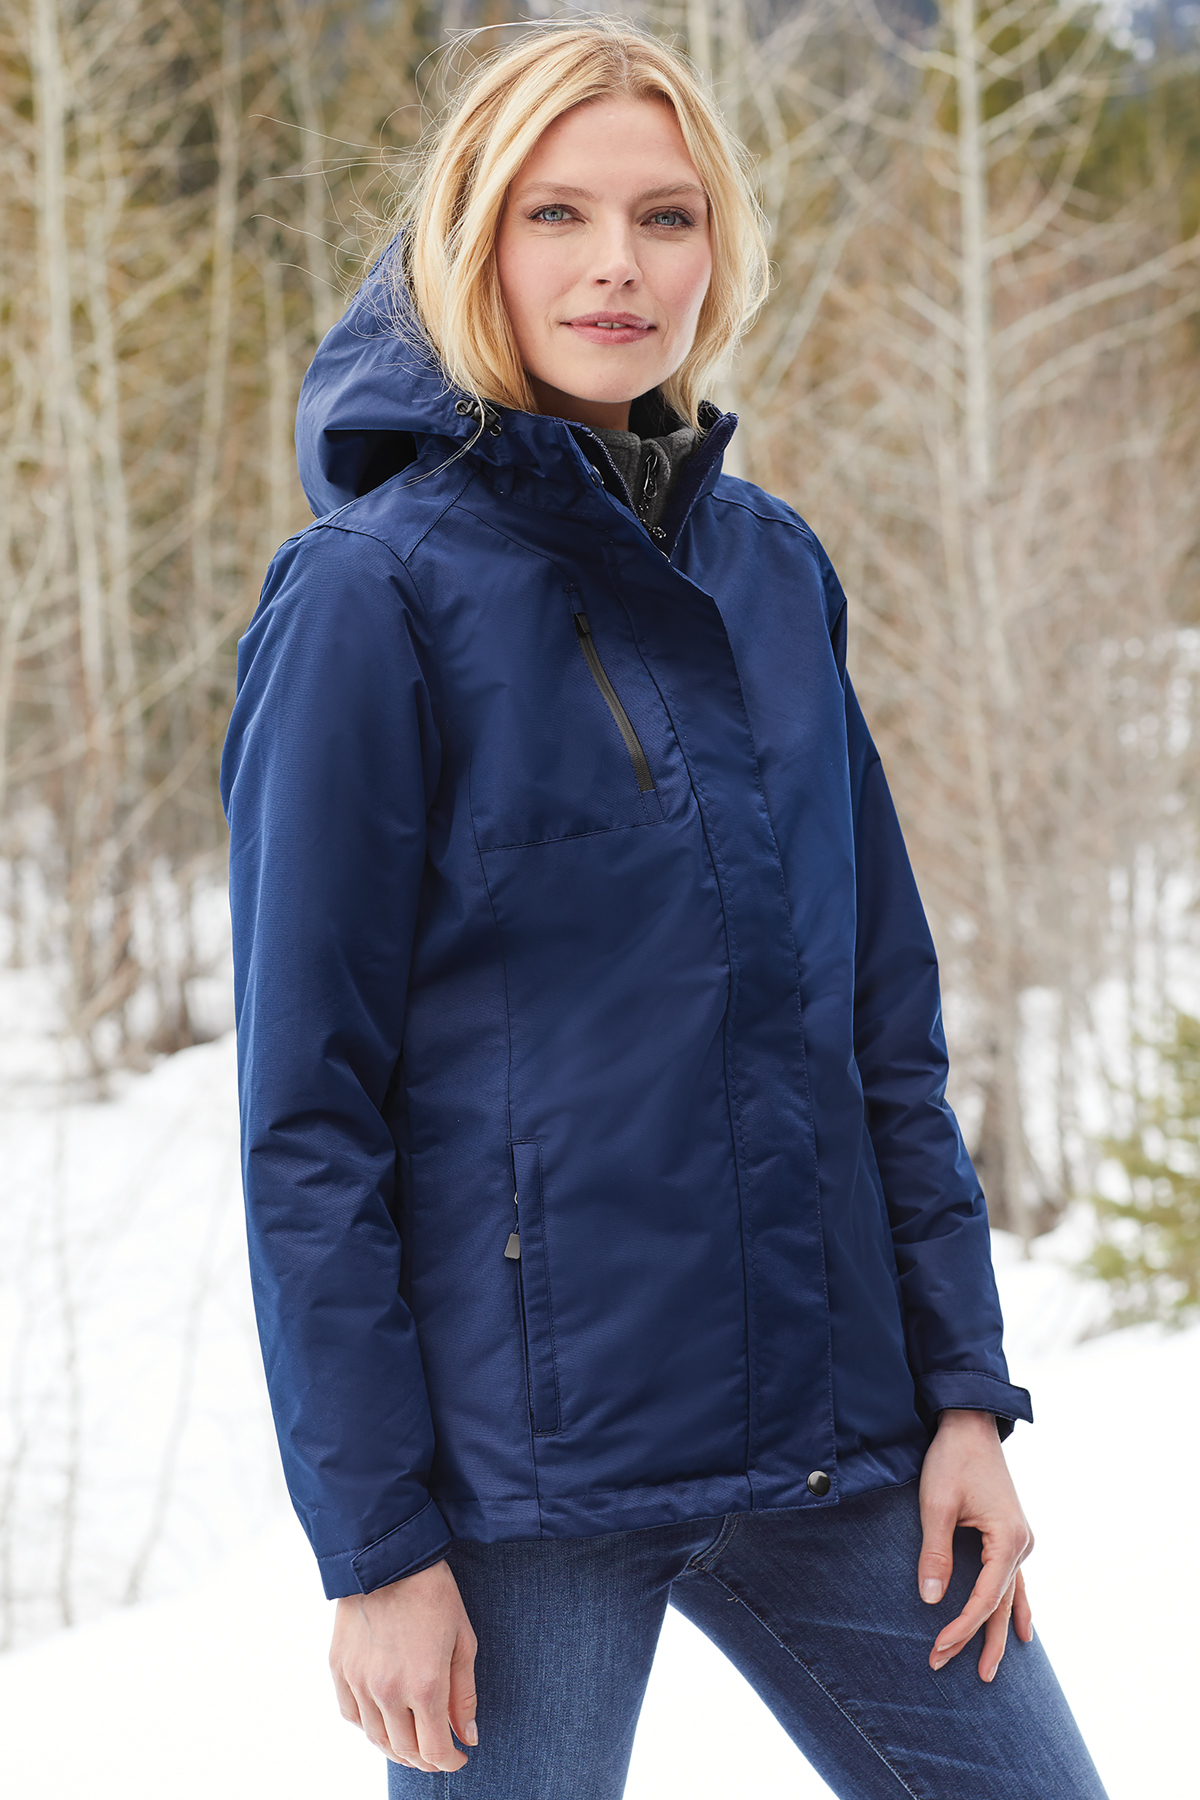 Ladies Authority All-Conditions Jacket | Product Port | SanMar